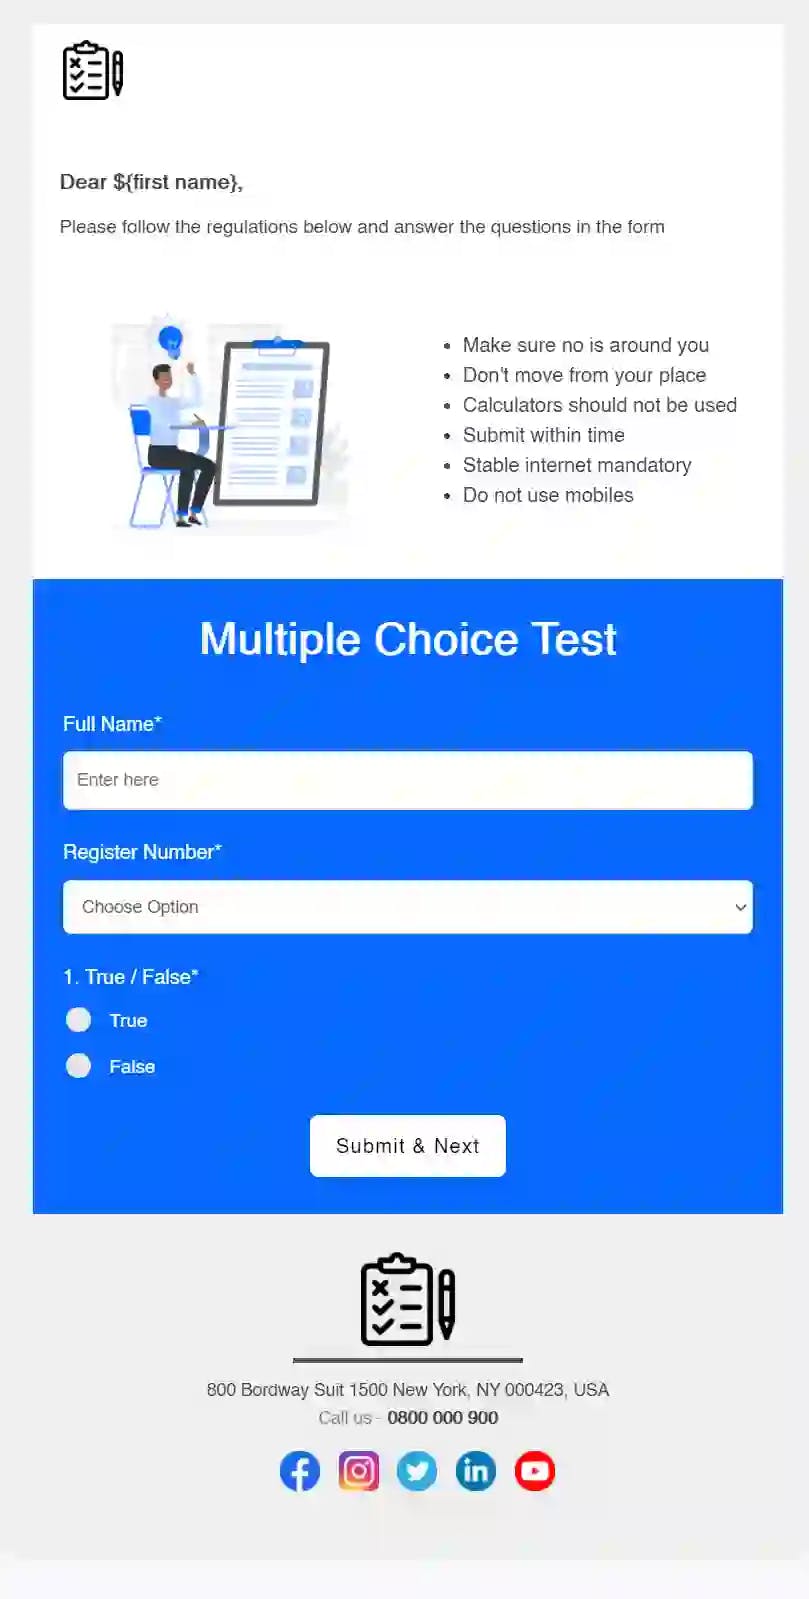 Multiple Choice Test Email Template